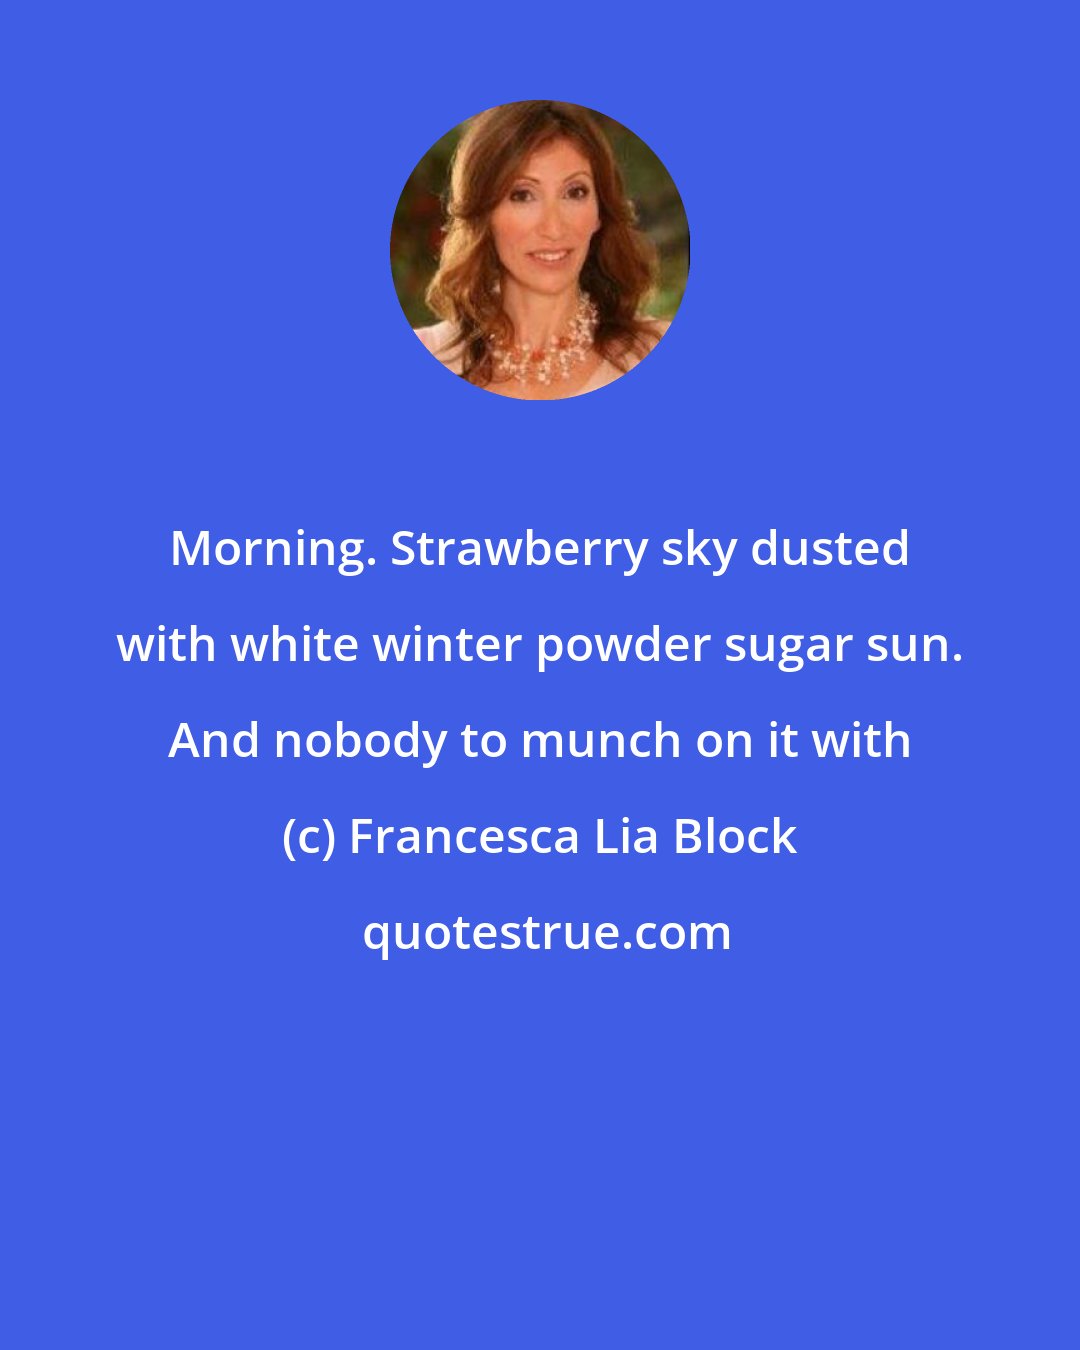 Francesca Lia Block: Morning. Strawberry sky dusted with white winter powder sugar sun. And nobody to munch on it with